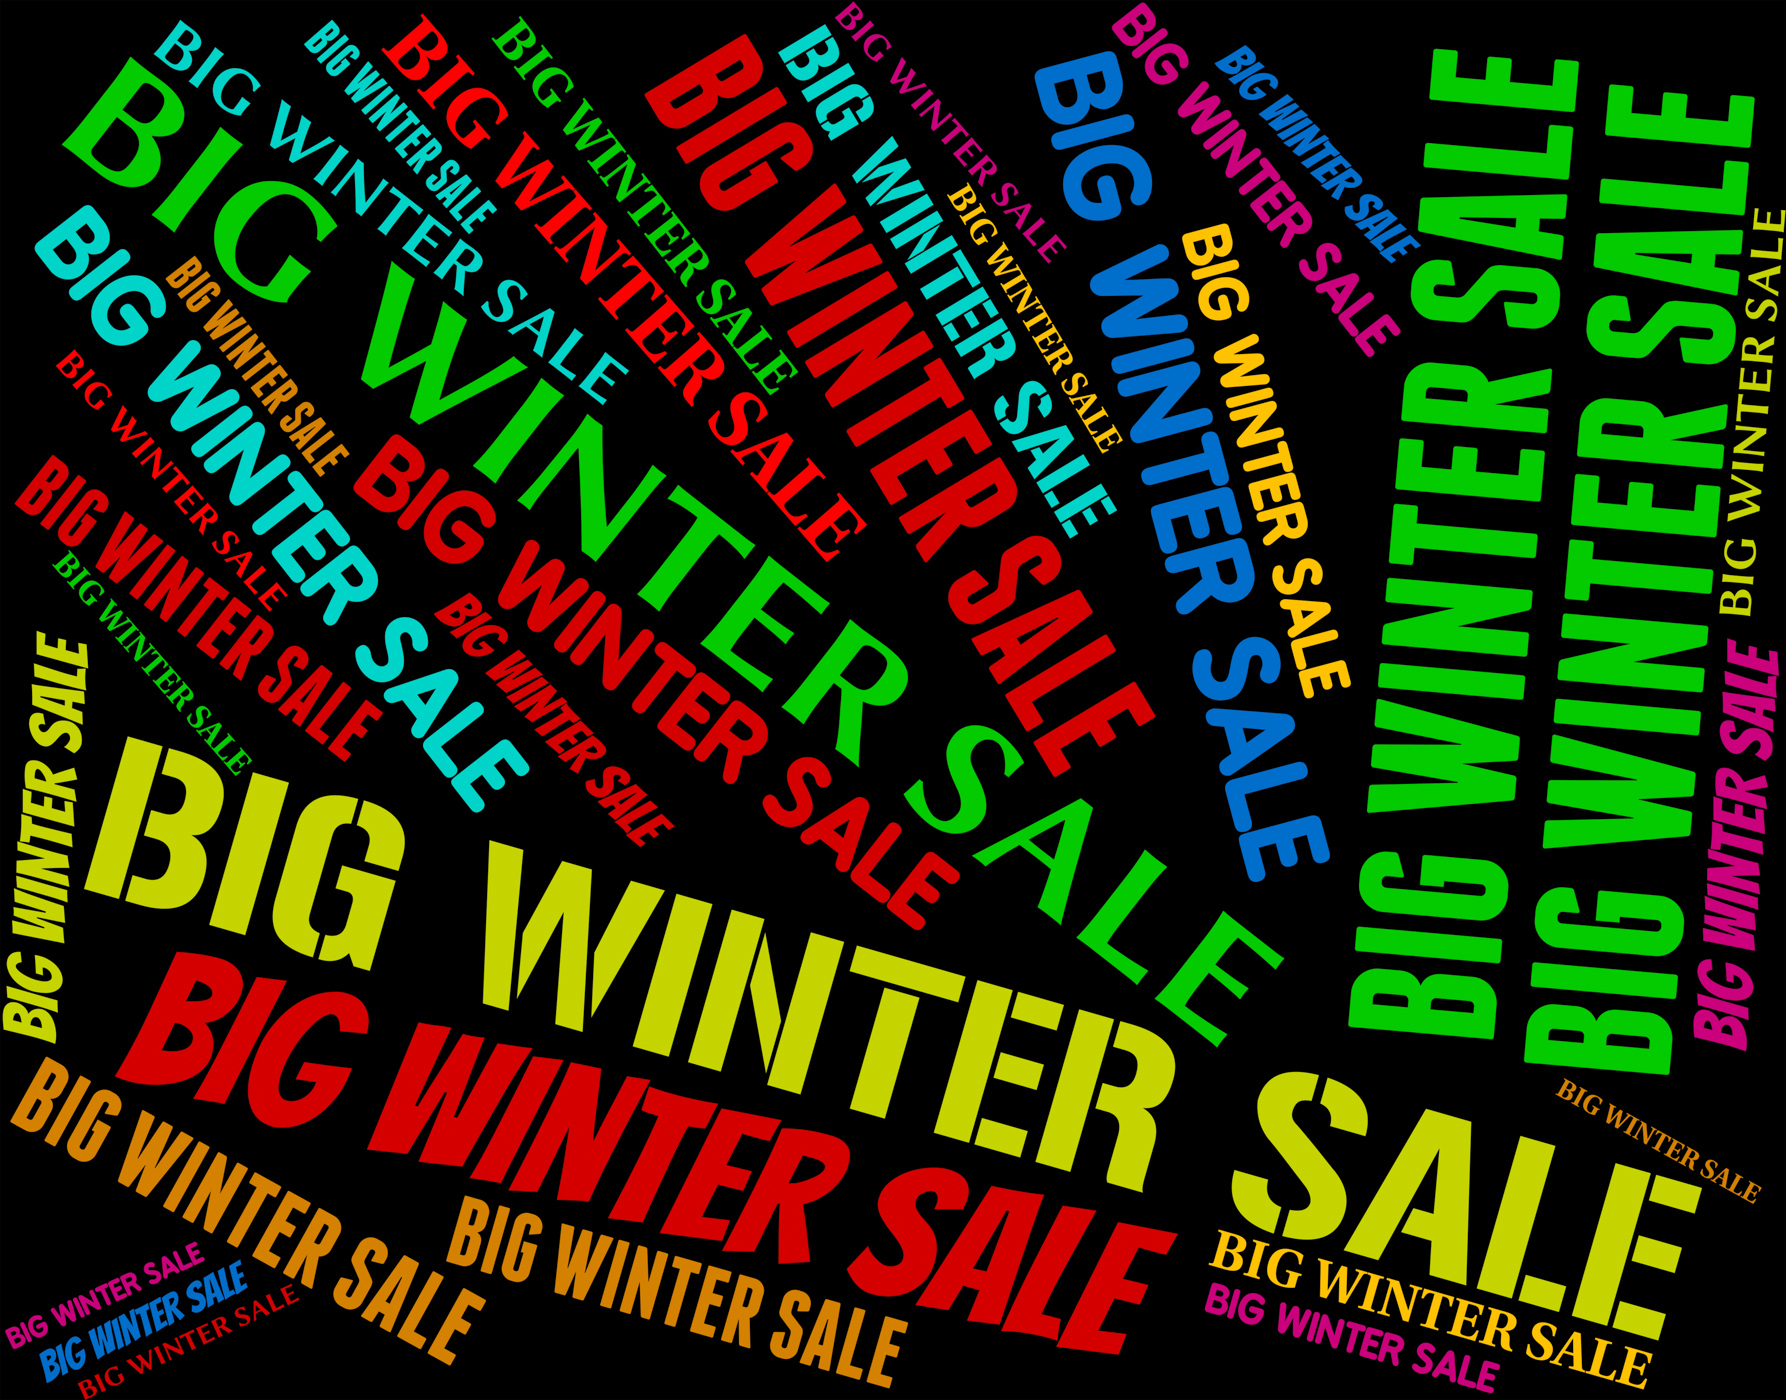 Big winter sale represents cheap promotion and words photo